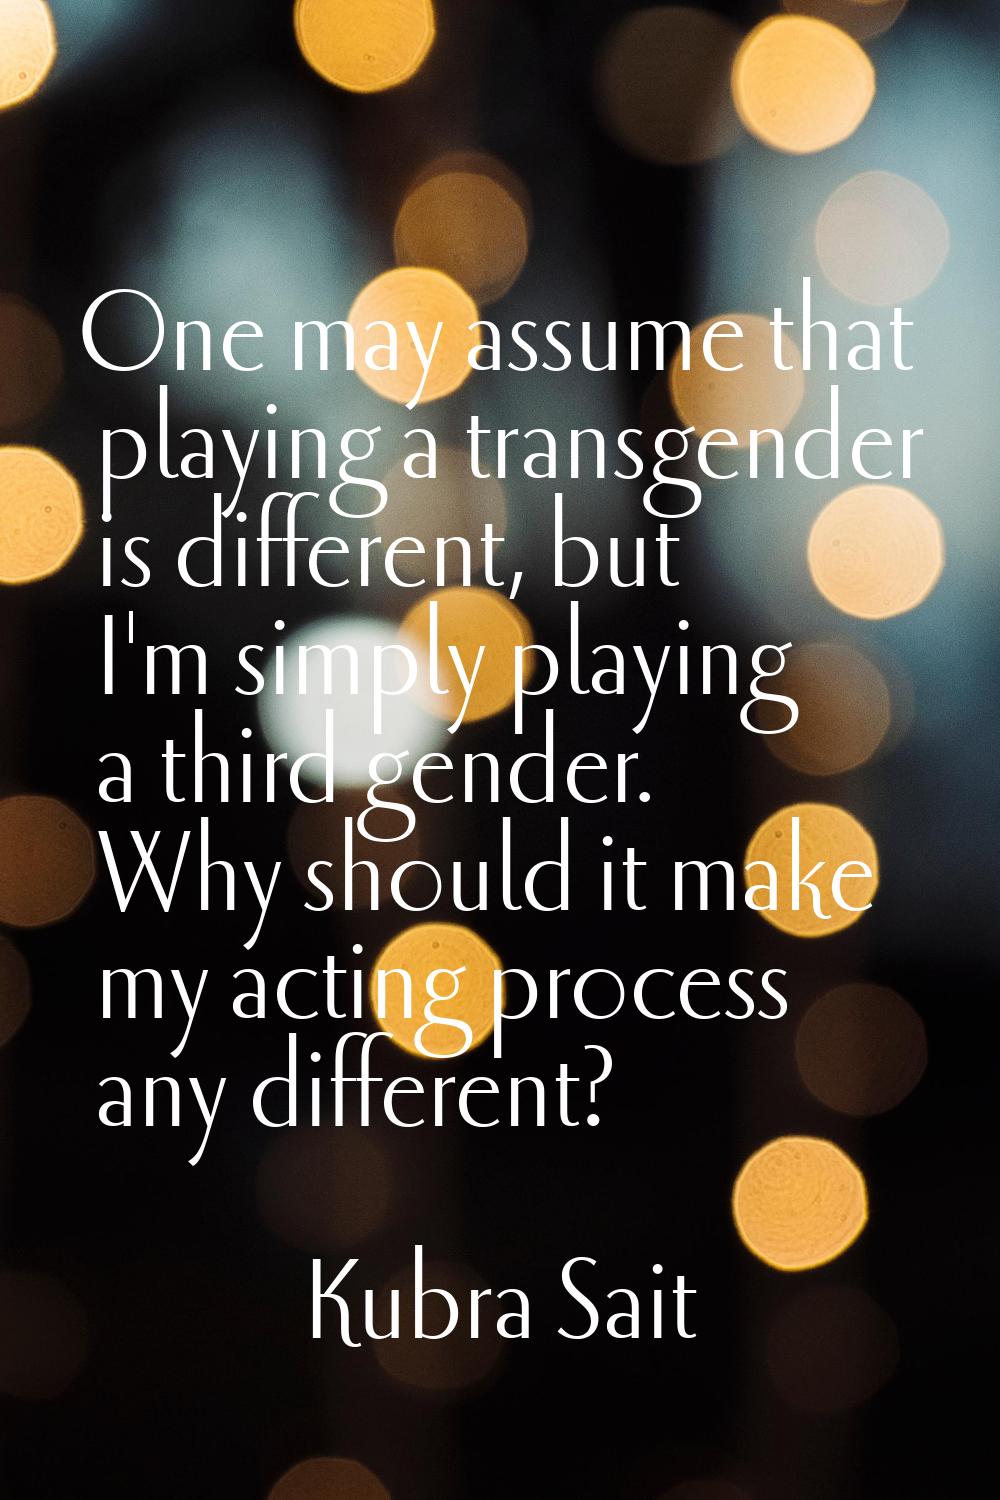 One may assume that playing a transgender is different, but I'm simply playing a third gender. Why 